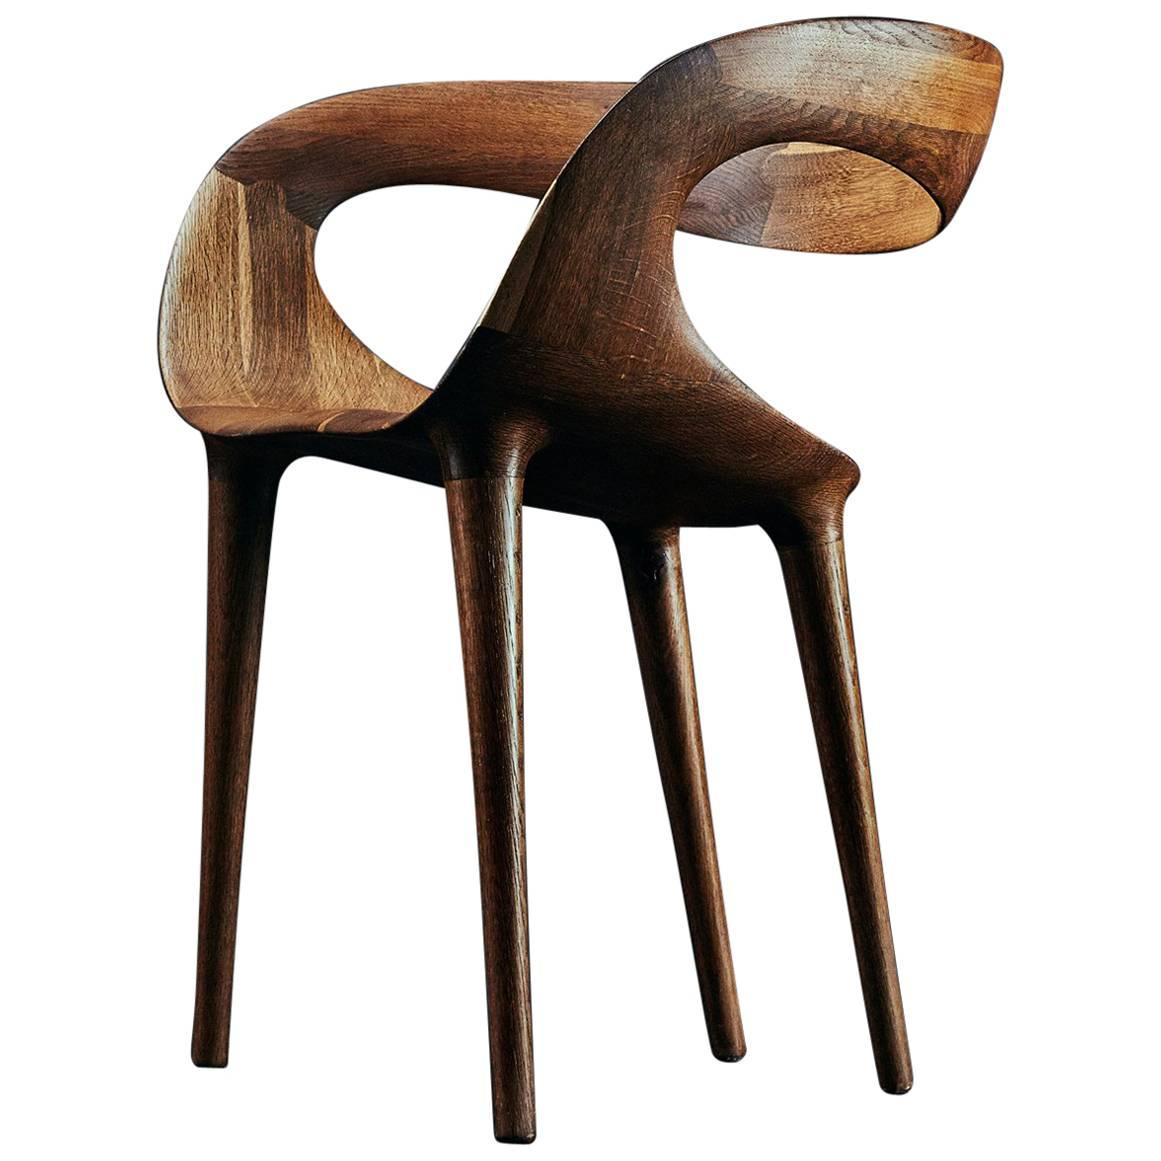 'Manta' Contemporary Dining Chair in Fumed Oak by Object Studio For Sale